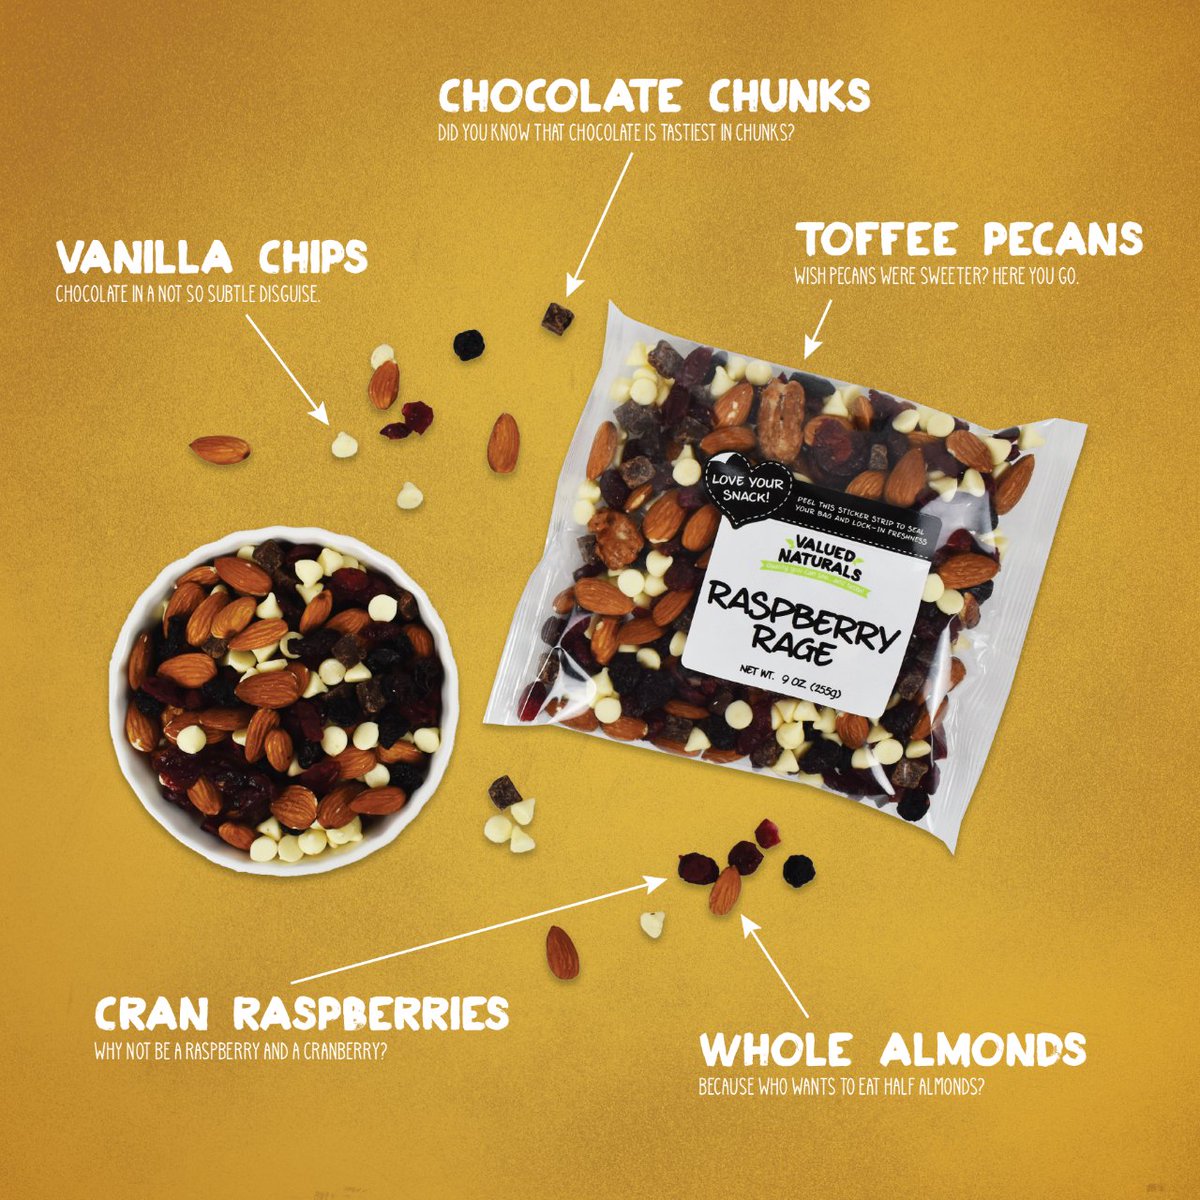 Can you break down the anatomy of our Raspberry Rage Mix?

This blend is a mix of sweet chocolate chunks, toffee pecans, cran raspberries and almonds for a much needed crunch!

#raspberry #almonds #valuednaturals #chocolate #snackmix #snacks #fridayfeature